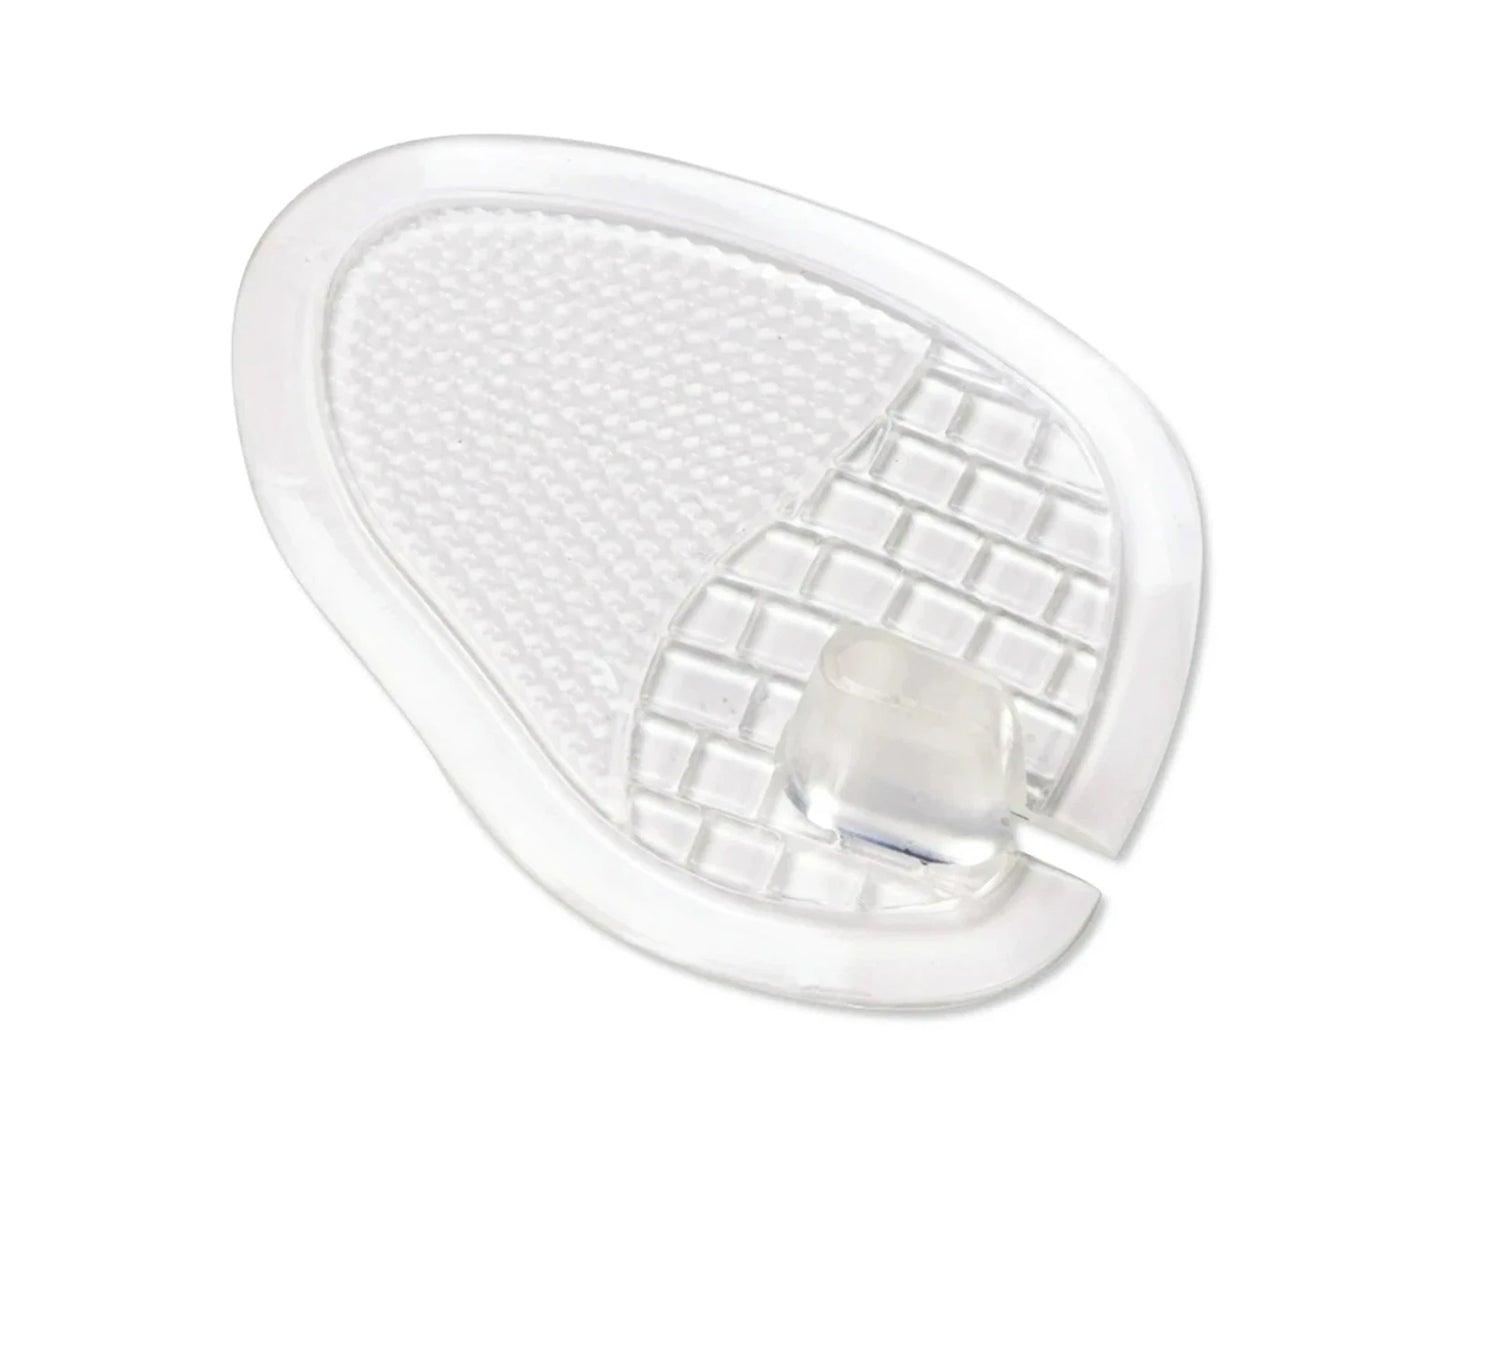 Sandal Ball-of-Foot Inserts with Thong Protector